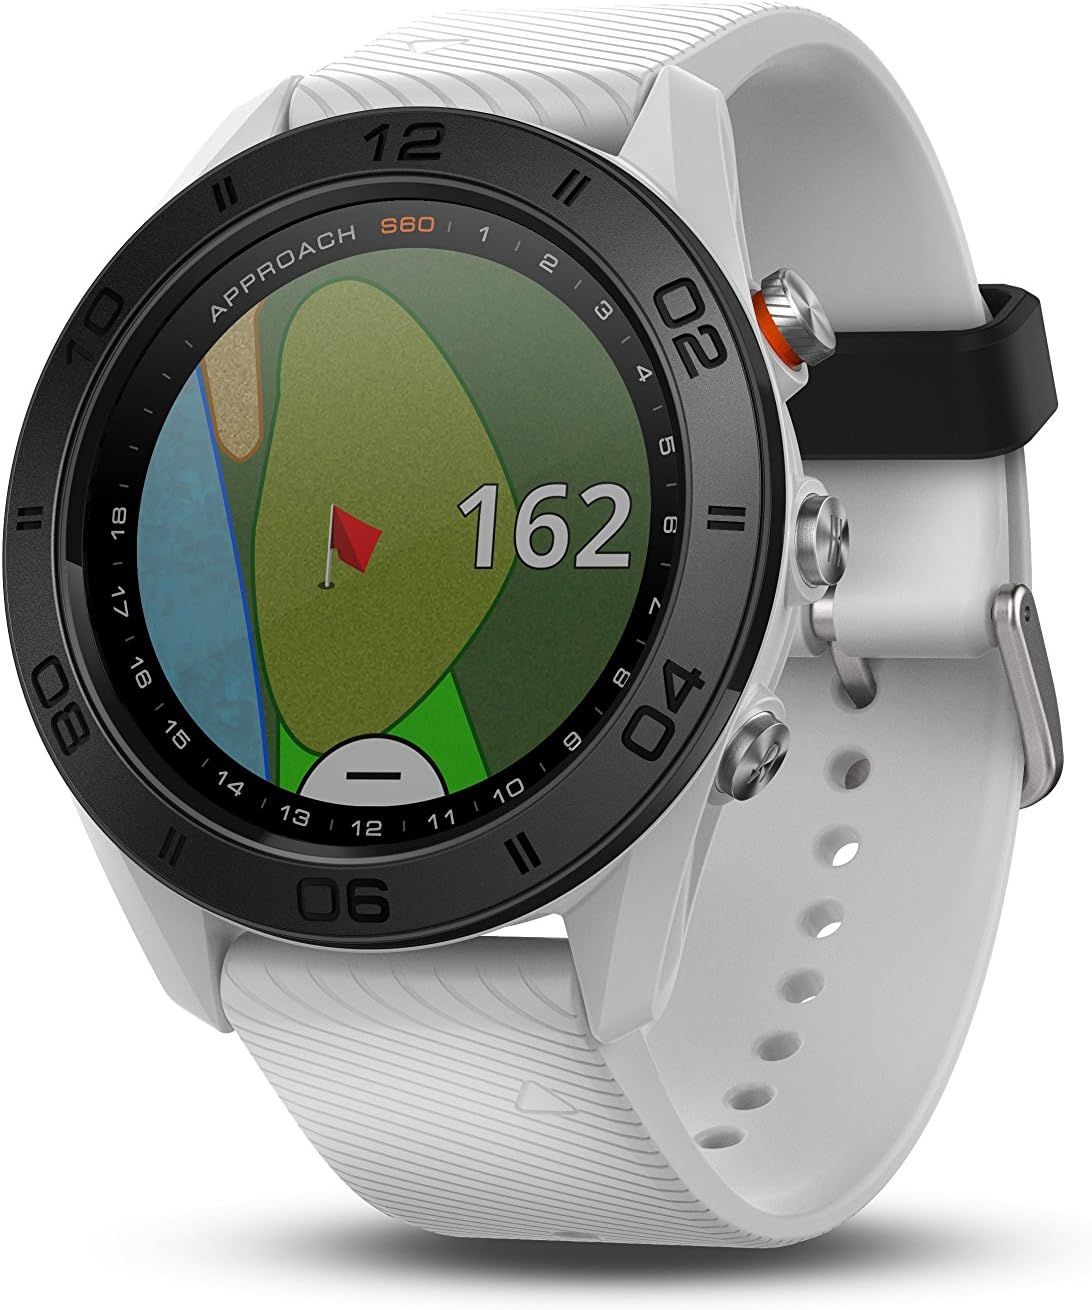 Garmin Approach S60, Premium GPS Golf Watch with Touchscreen Display and Full Color CourseView Ma... | Amazon (US)